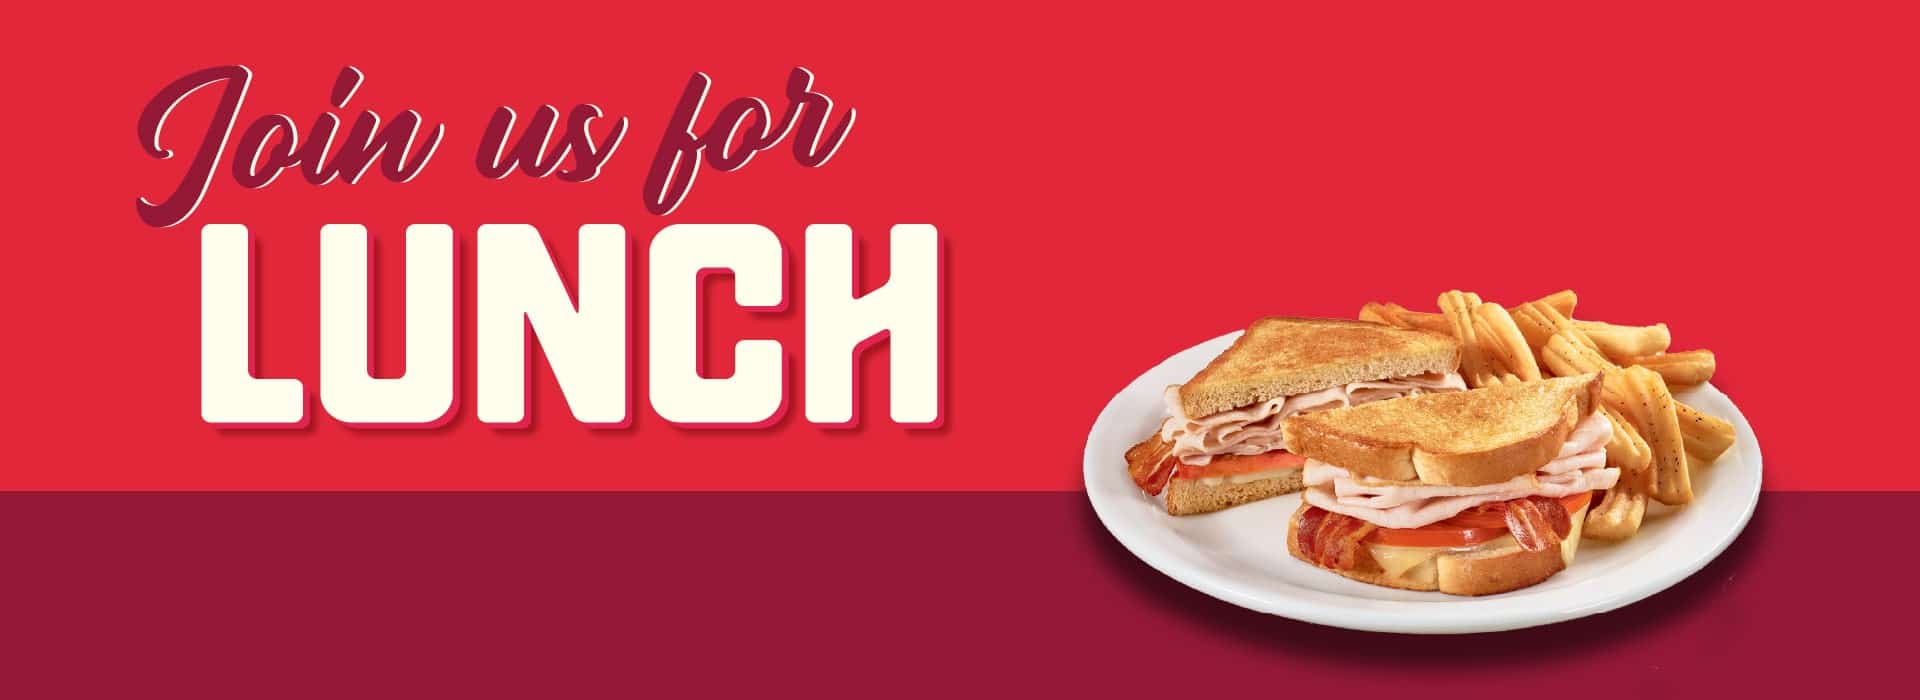 Enjoy Your Denny’s Lunch Favourites 7 Days a Week